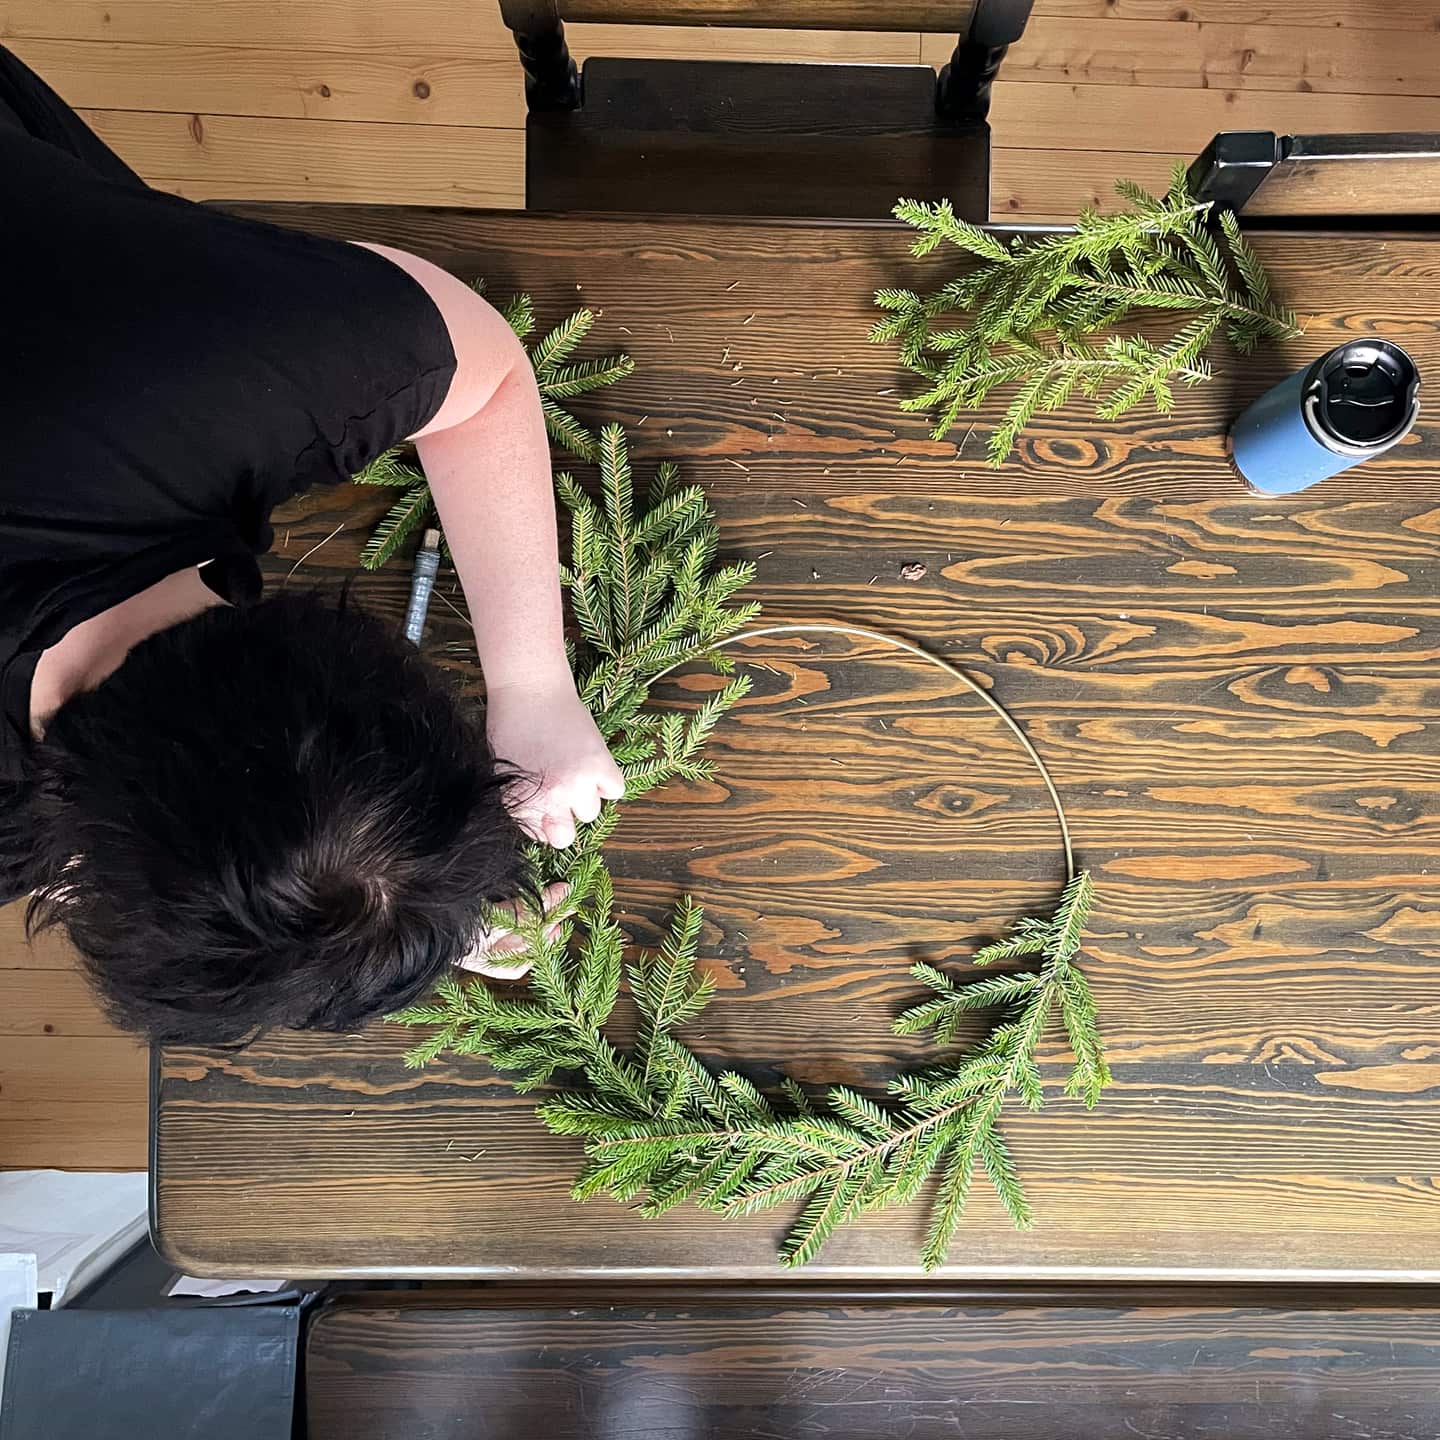 Top-down view over a  kitchen table. A woman is tieing a wreath using spruce twigs.